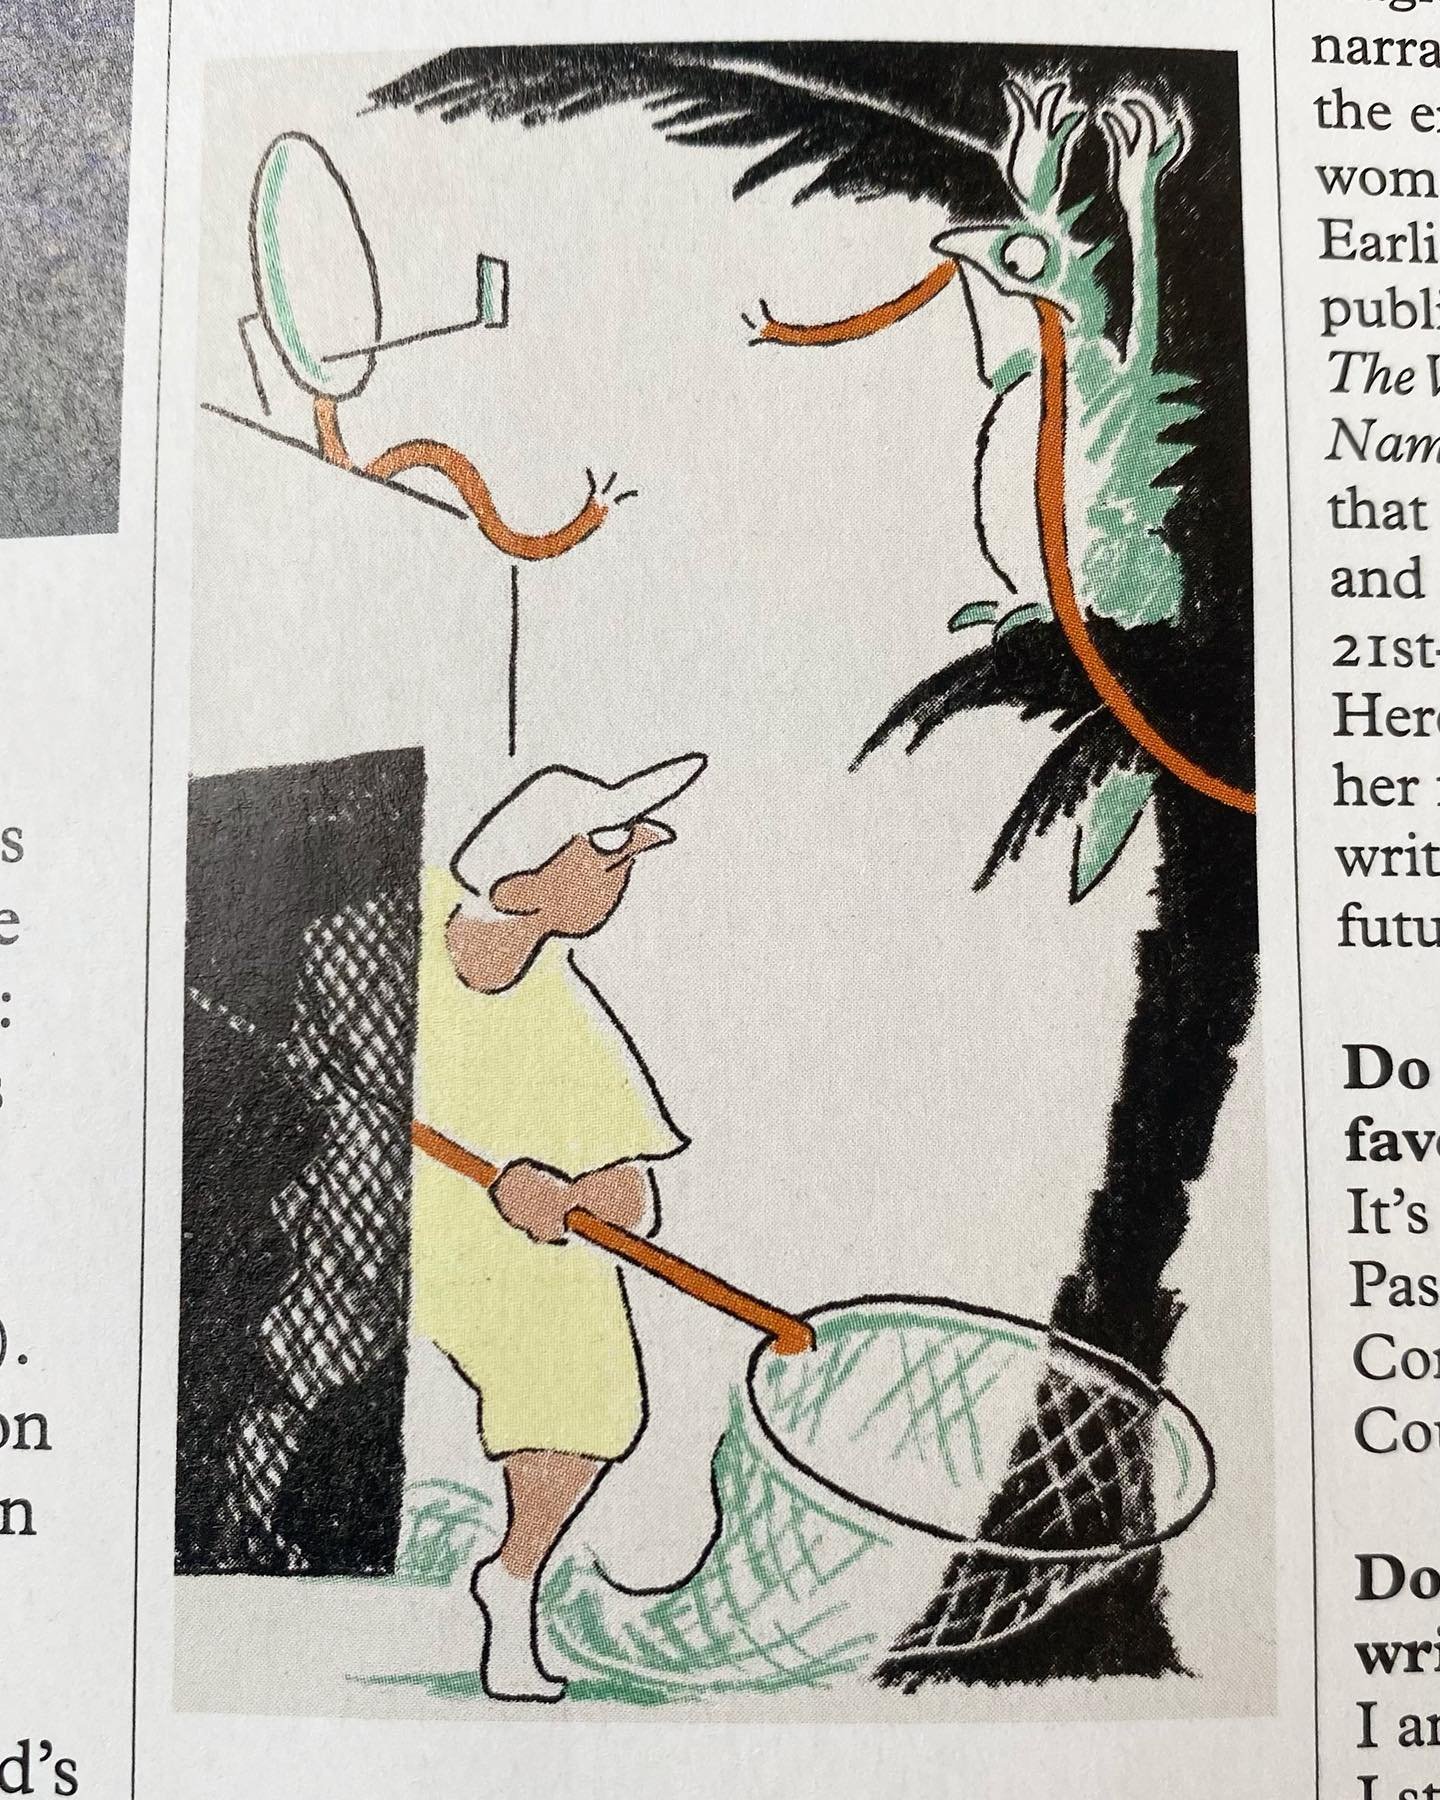 Illustration for Monocle. And my sketches in the second shot 🧐 Iguanas are starting to really irritate the locals in South Florida. A councillor in Key Biscaye &lsquo;had to implore citizens not to shoot iguanas out of trees&rsquo;. Iguanas are a le